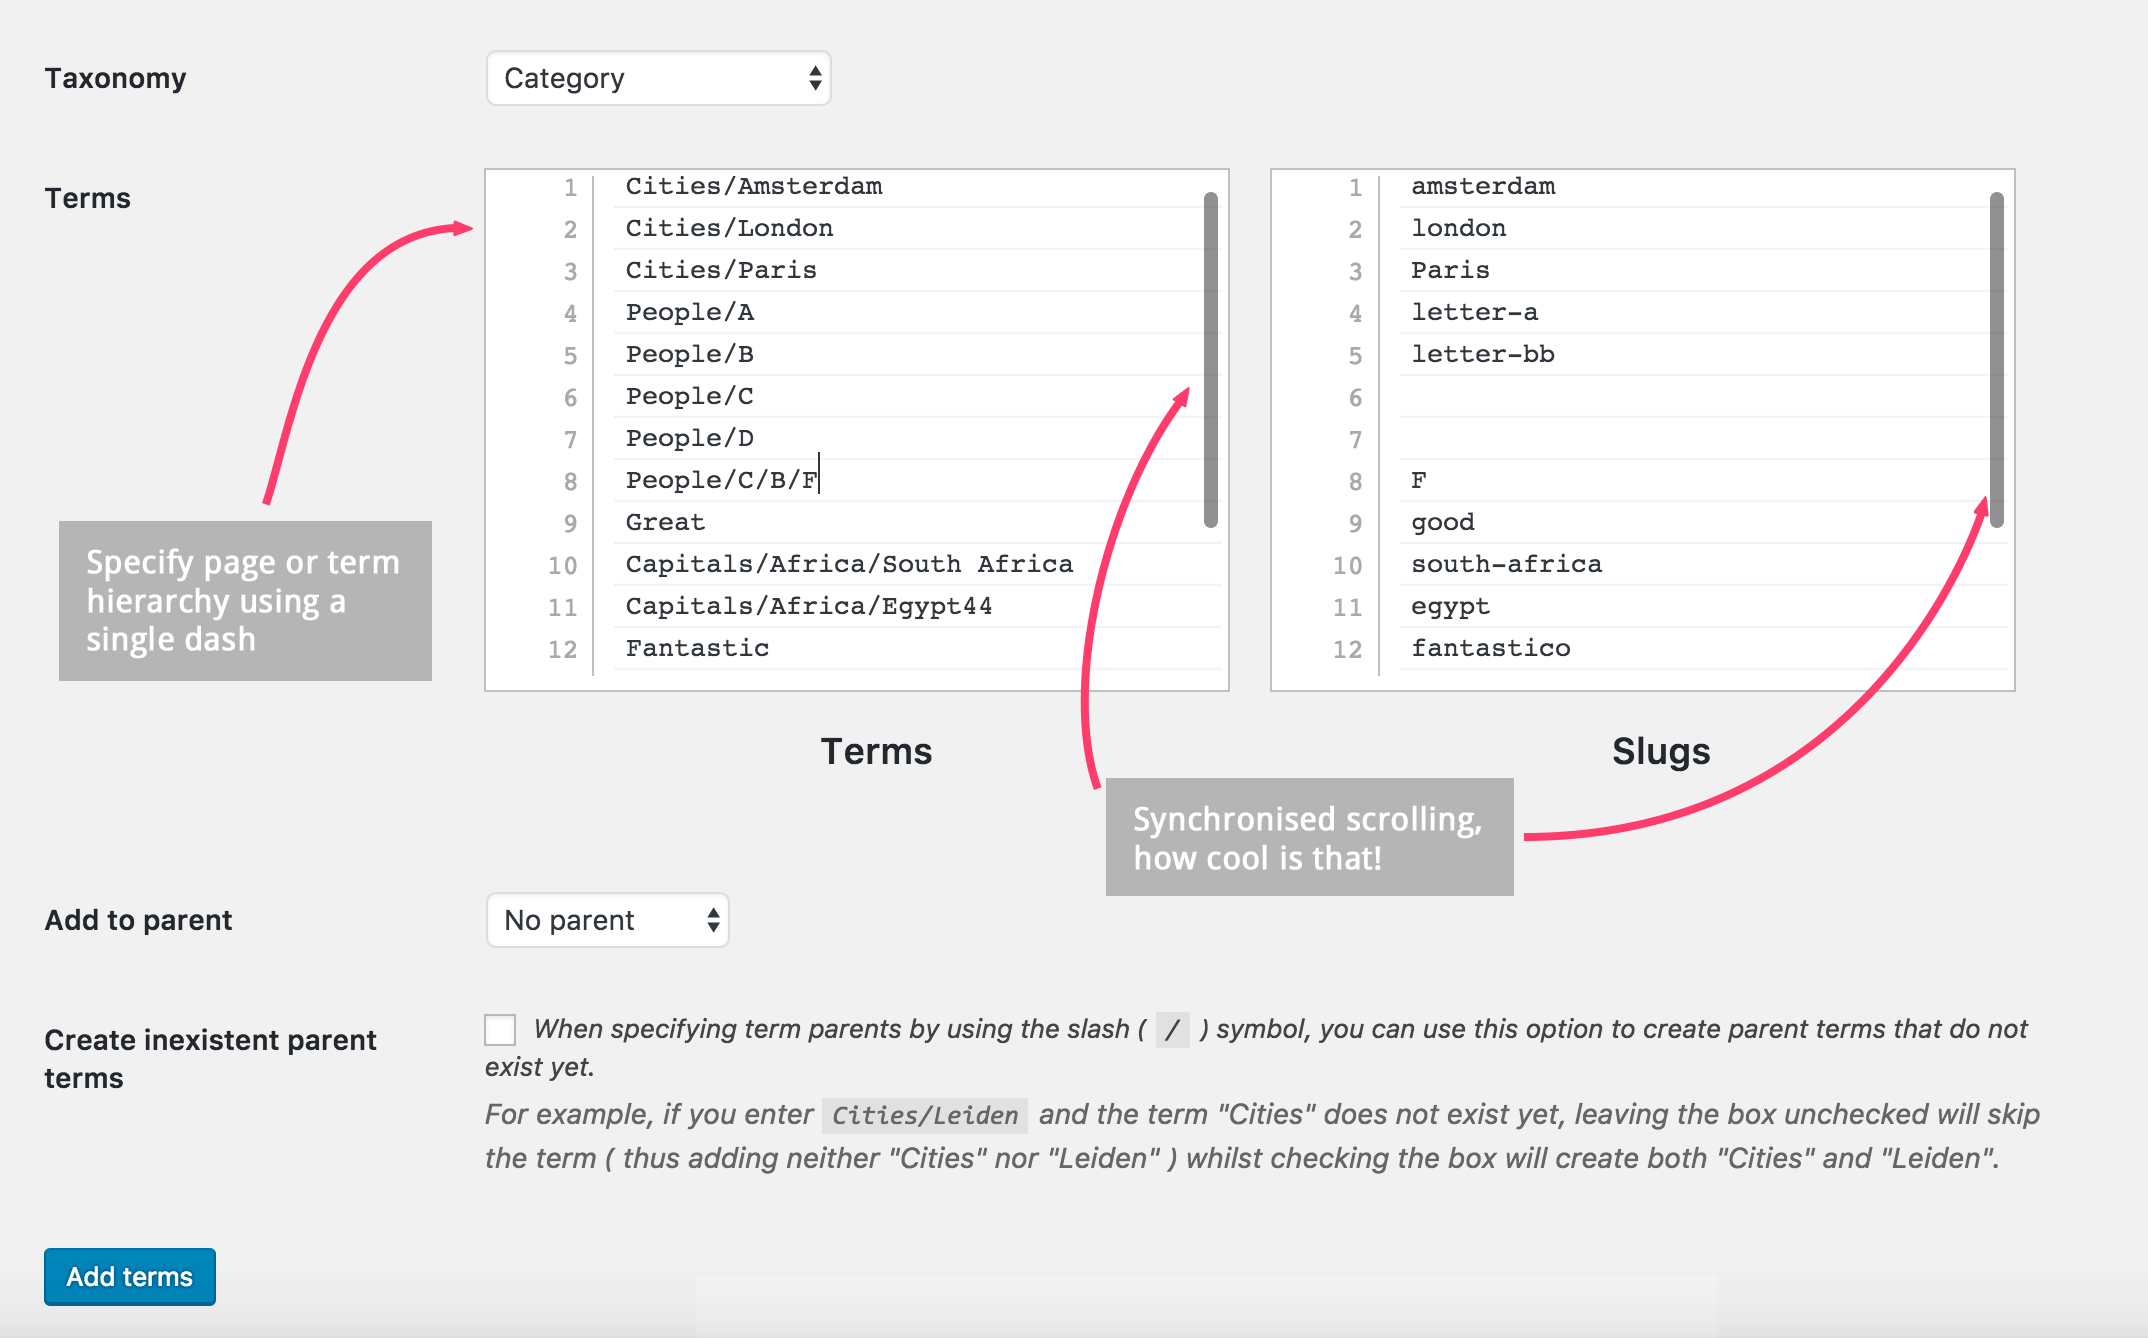 Many nifty features to make the creation of terms and posts even easier!